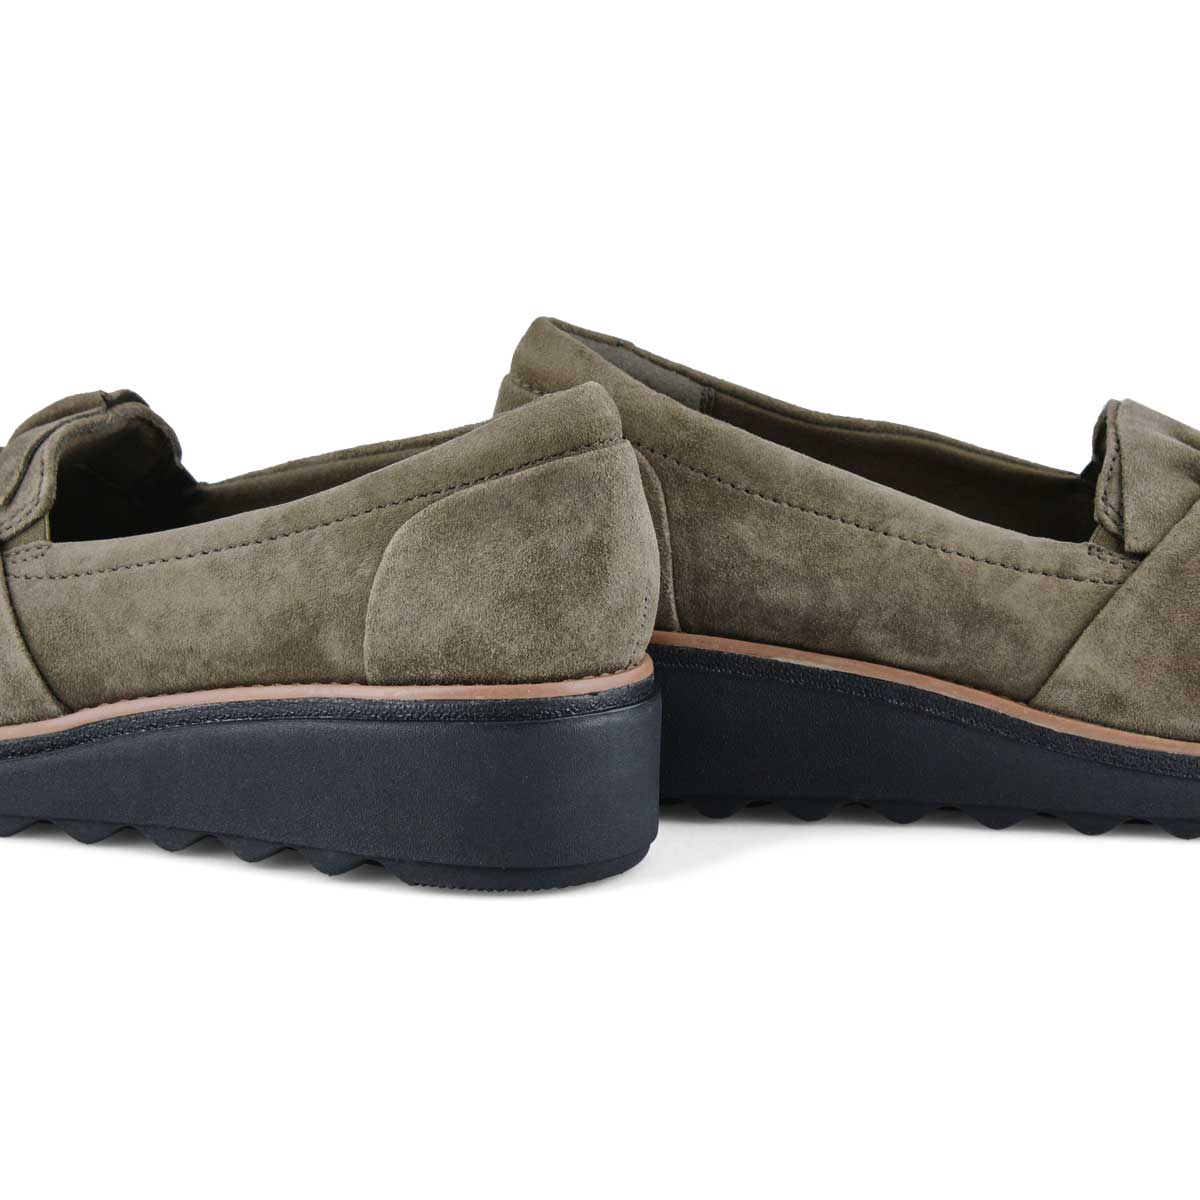 Women's Sharon Dasher Casual Oxford - Olive